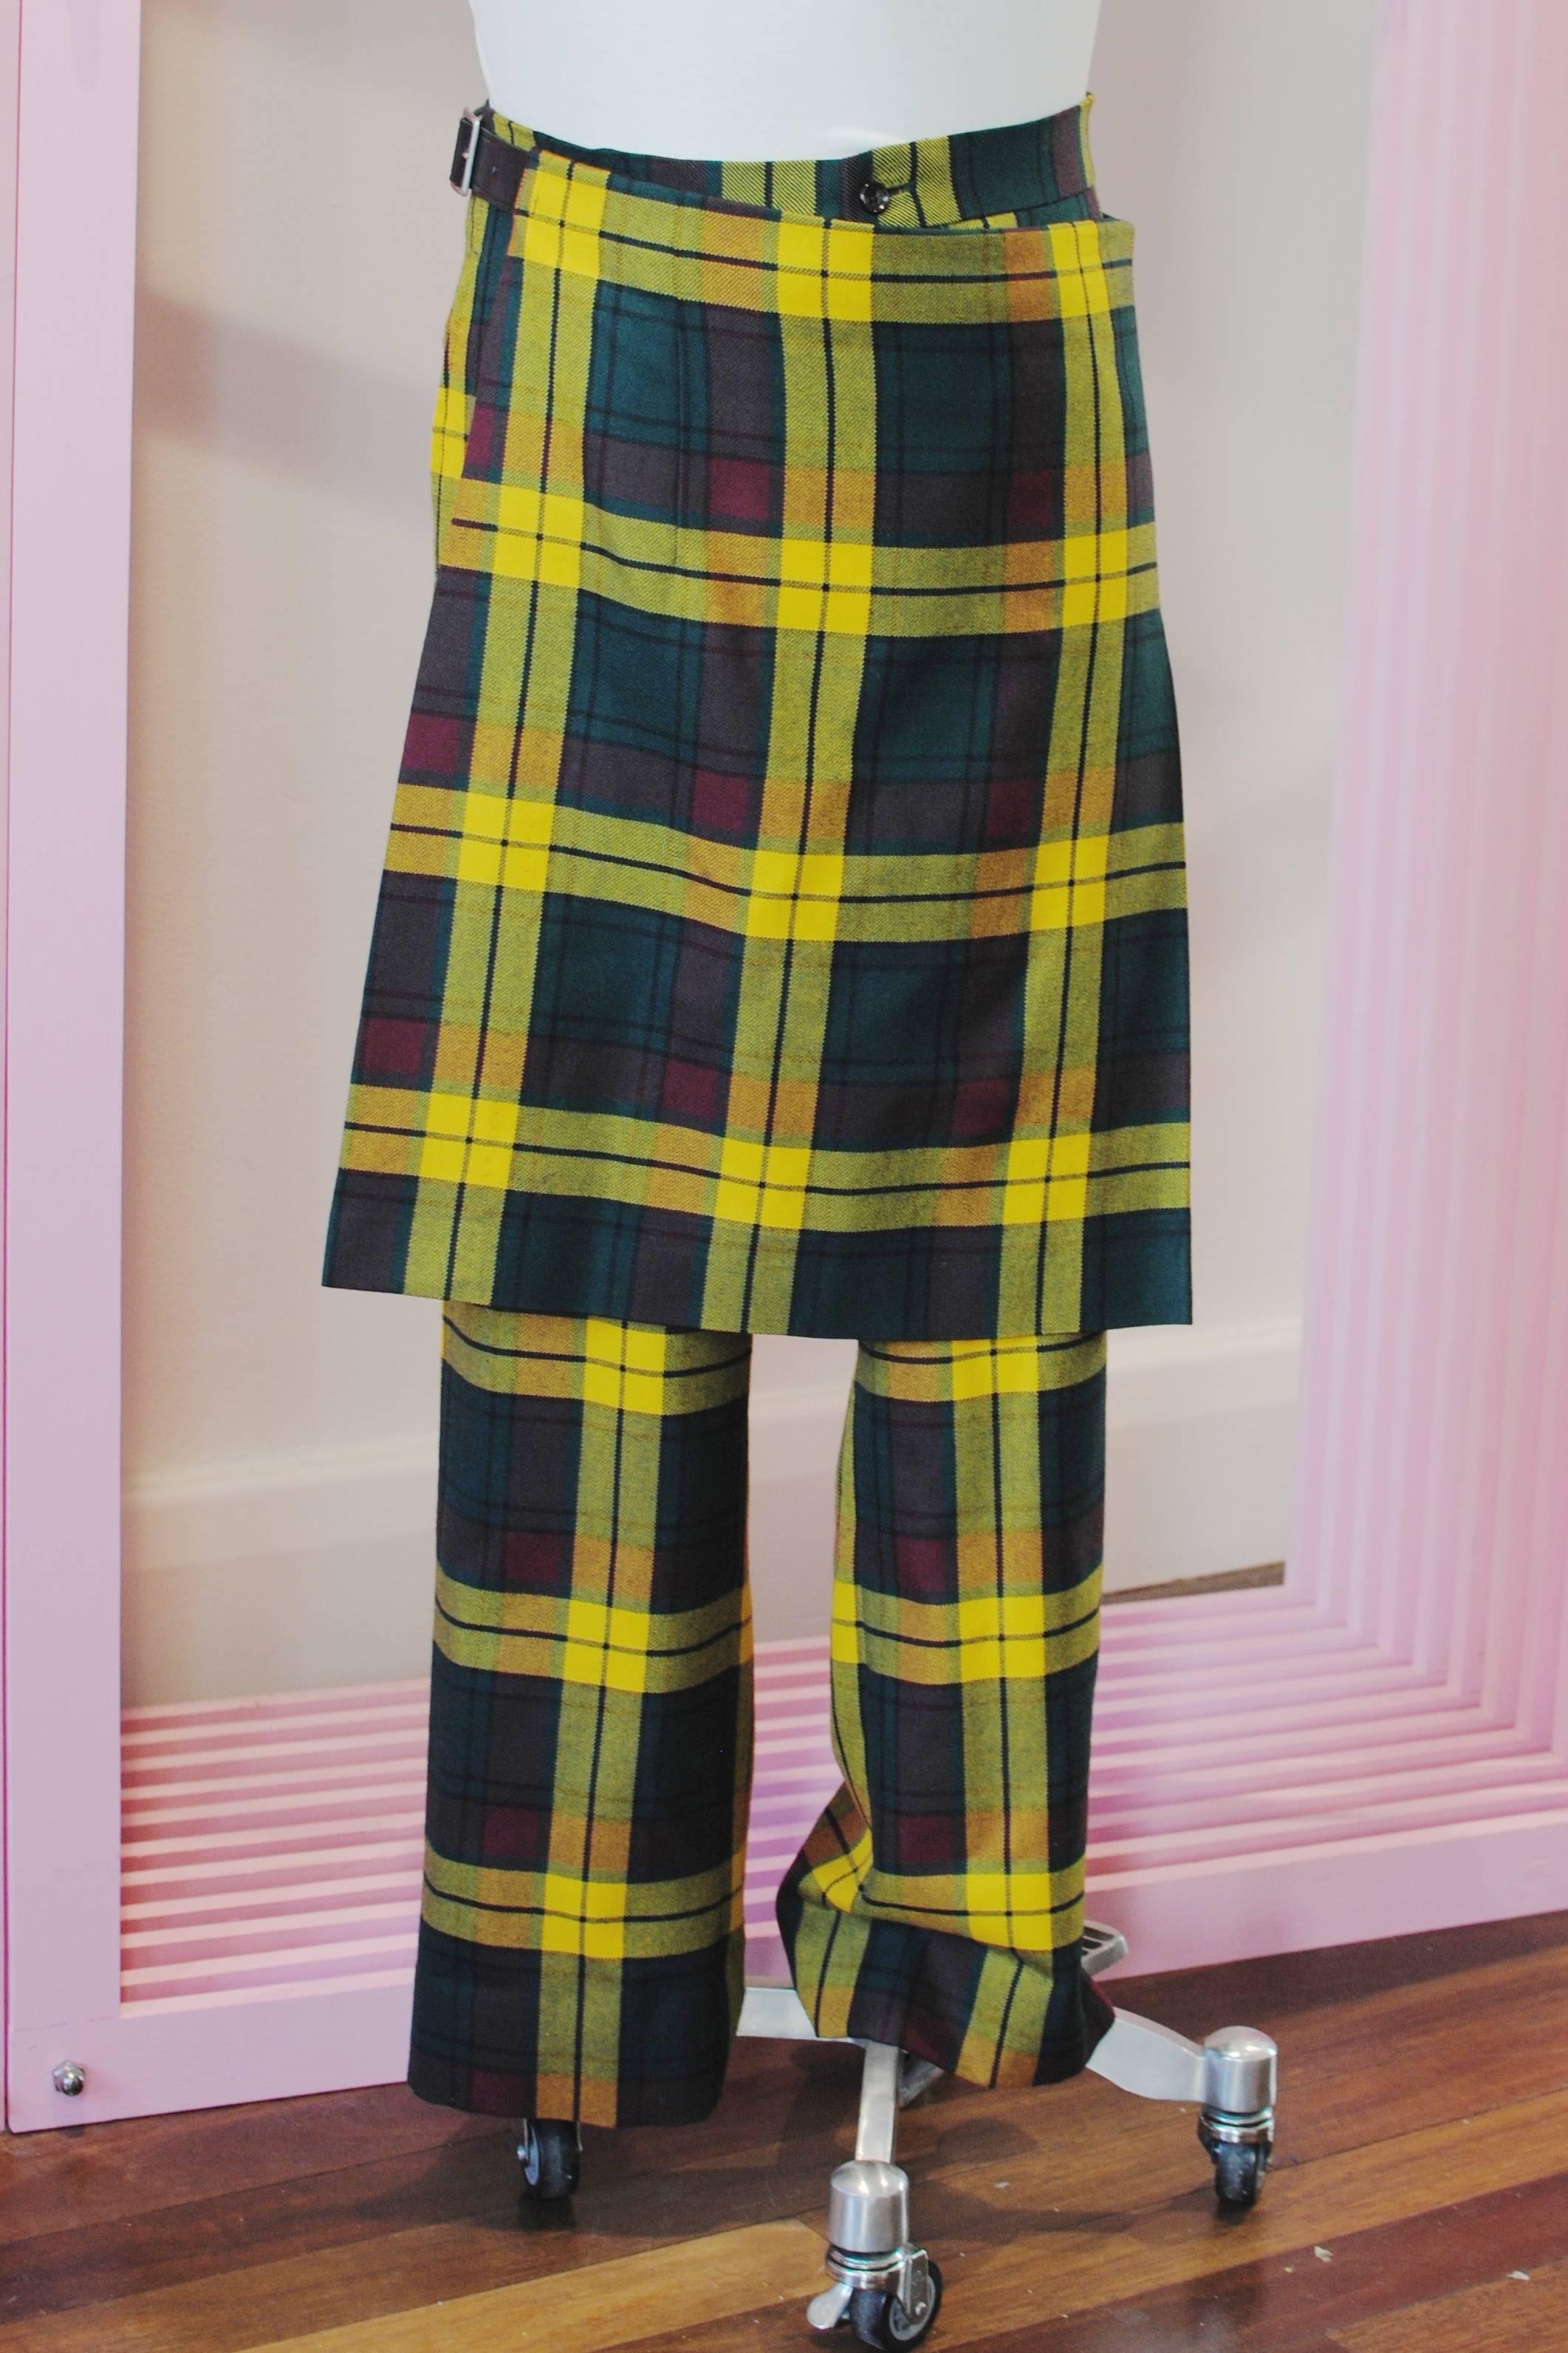 COMME des GARÇONS  Homme Plus plaid kilt pants from the 2004 Autumn/Winter collection. They feature a kilt with two leather belt fasteners, two waist level pockets, one back pocket and plaid wool fabric.

Size — Medium
Waist — 86 cm
Rise — 28